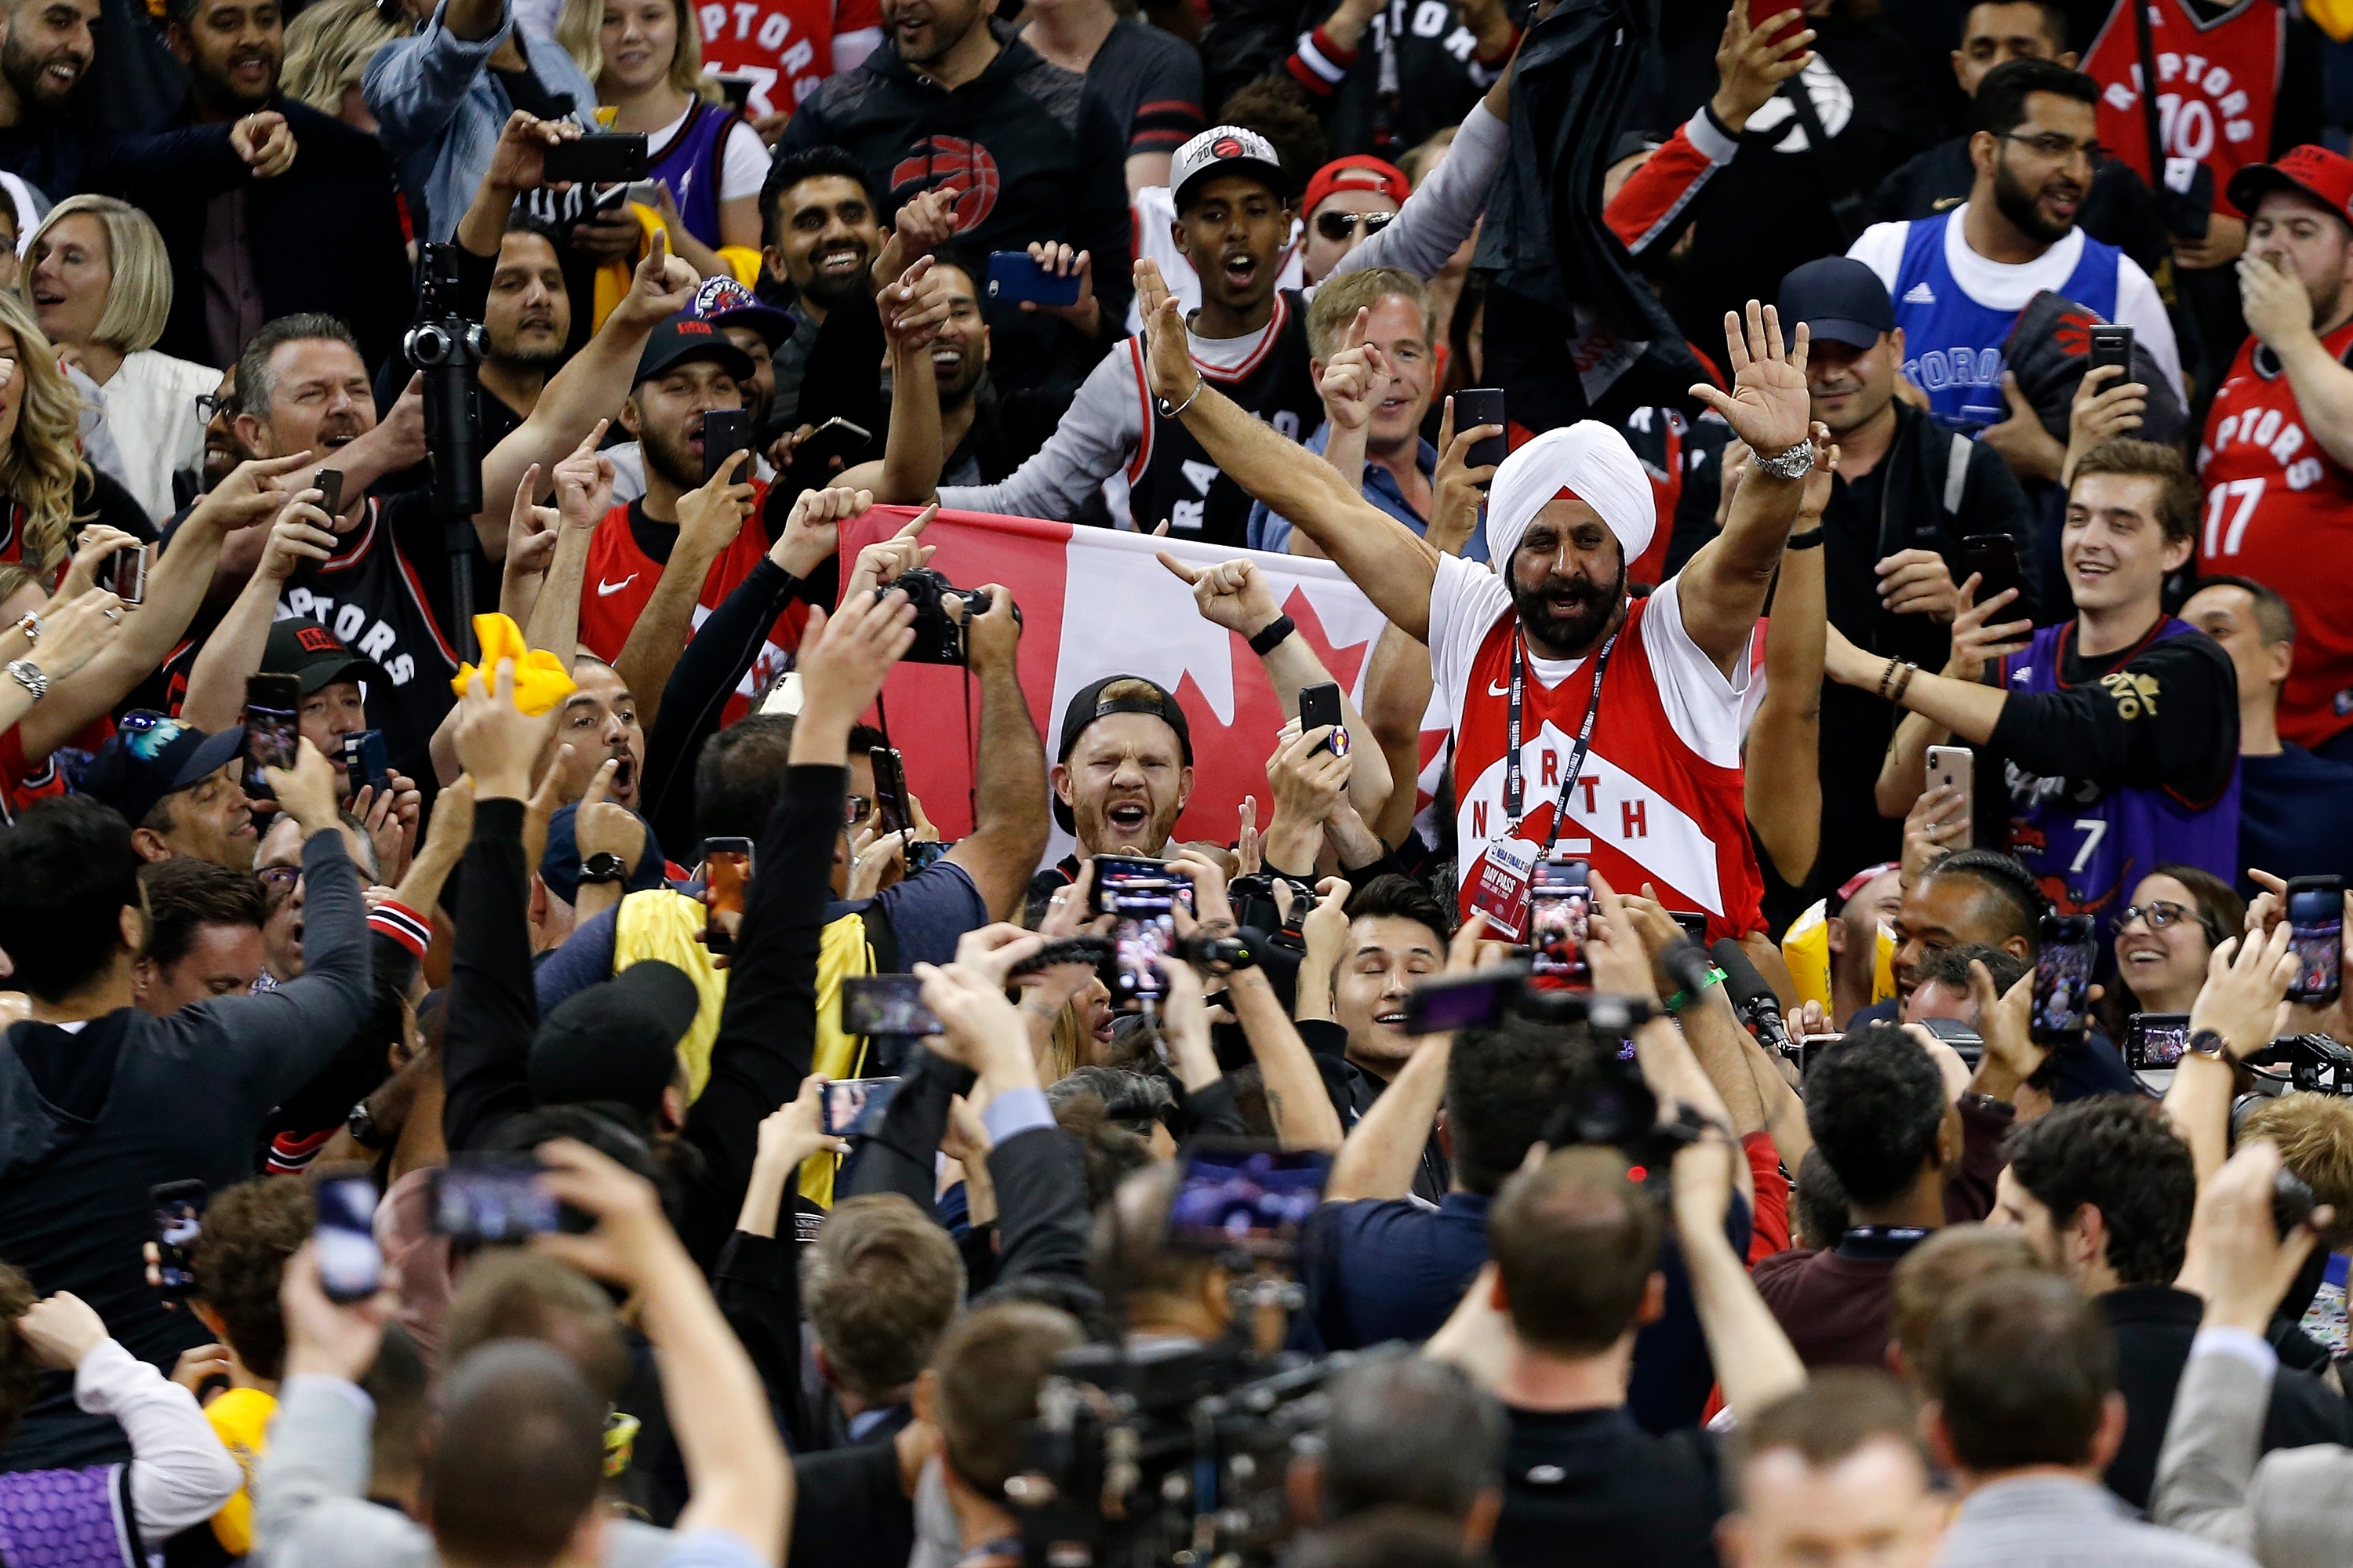 We the (Takhini) North, where a Raptors win 'would mean everything